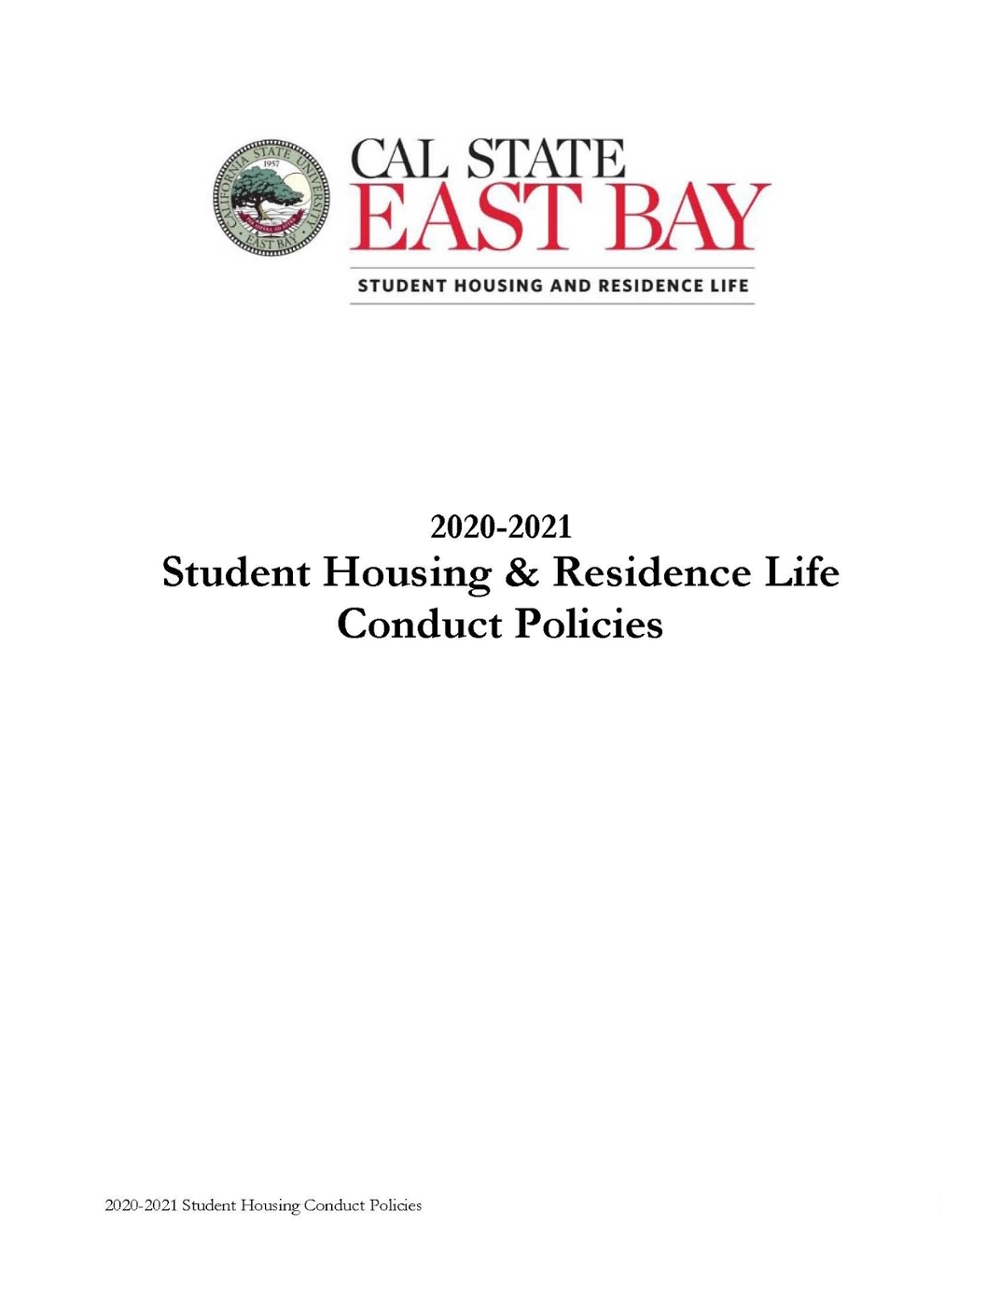 Housing Conduct Policies